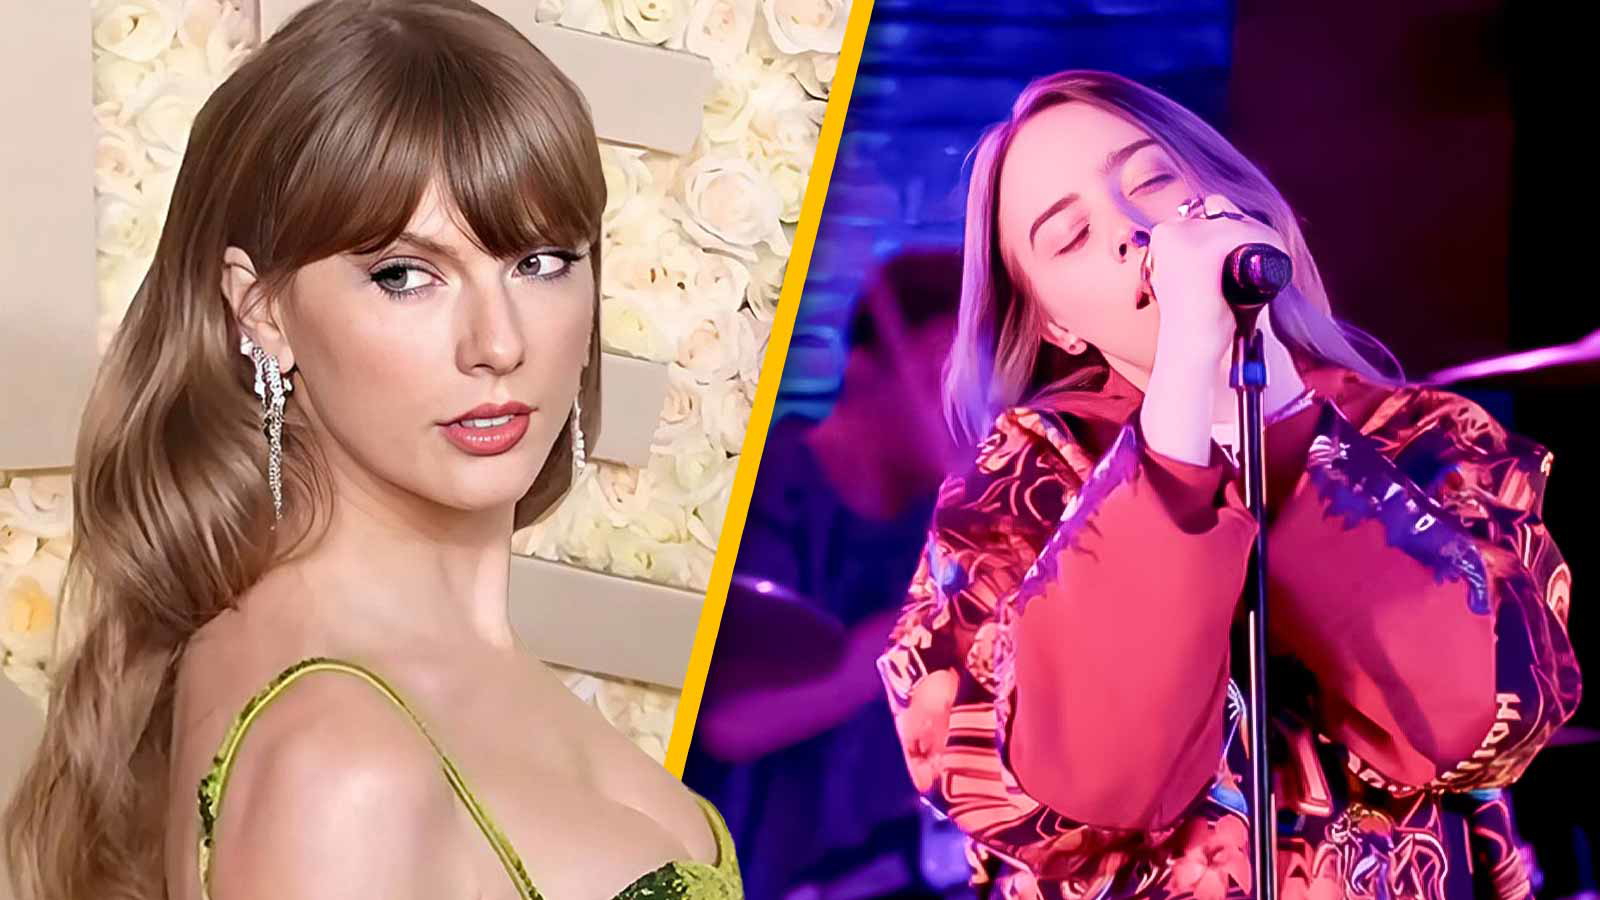 “Even if that means riling Billie and her fans”: Taylor Swift Accussed of Desperately Trying to Stay on Top of Music Industry